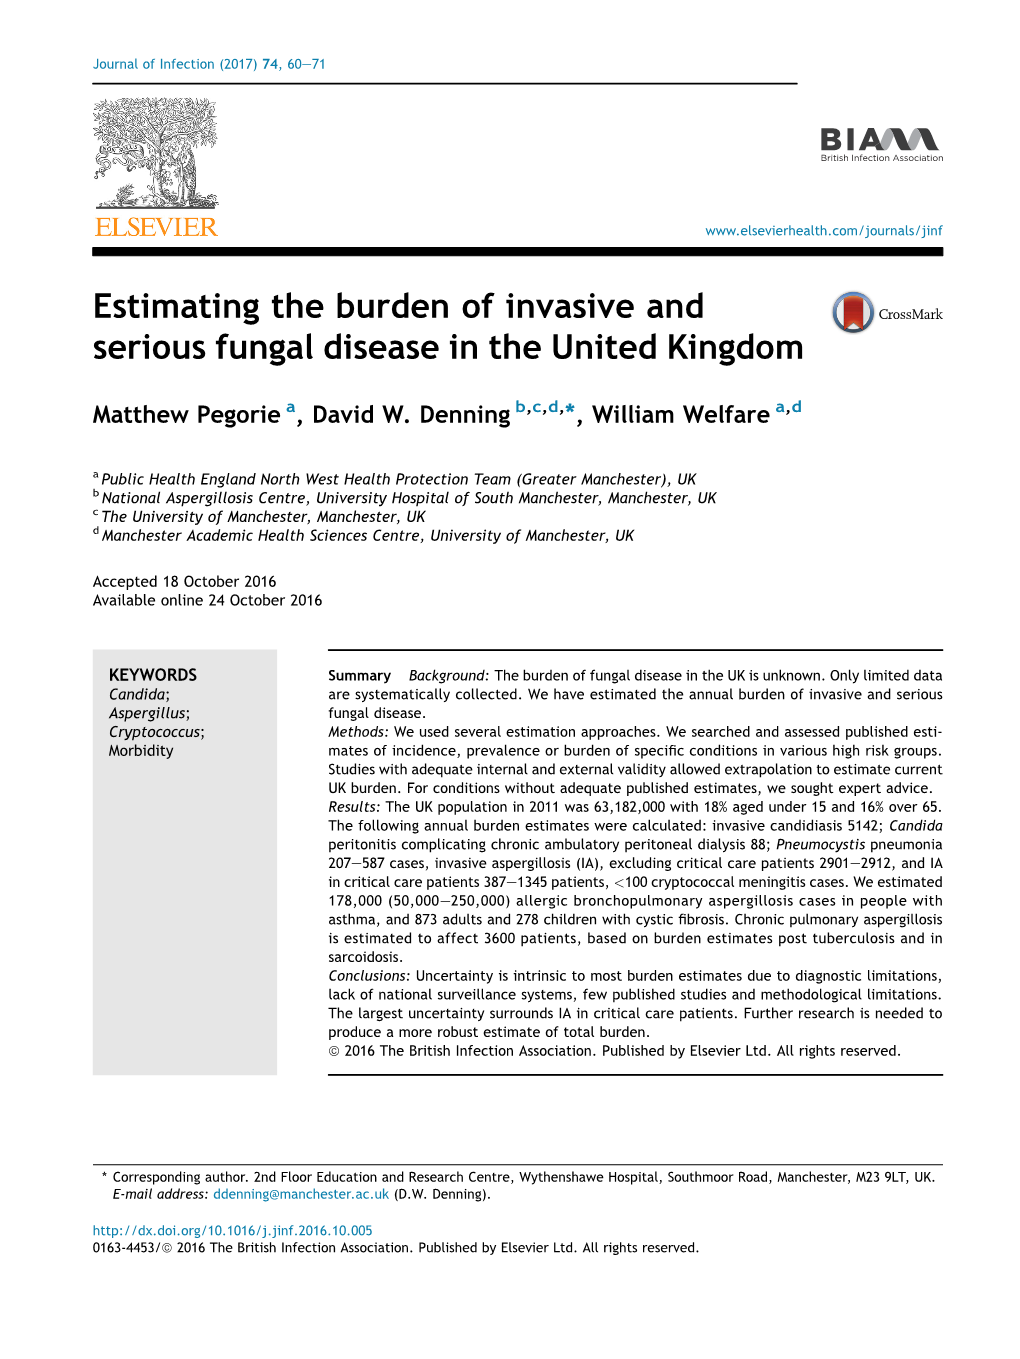 Estimating the Burden of Invasive and Serious Fungal Disease in the United Kingdom